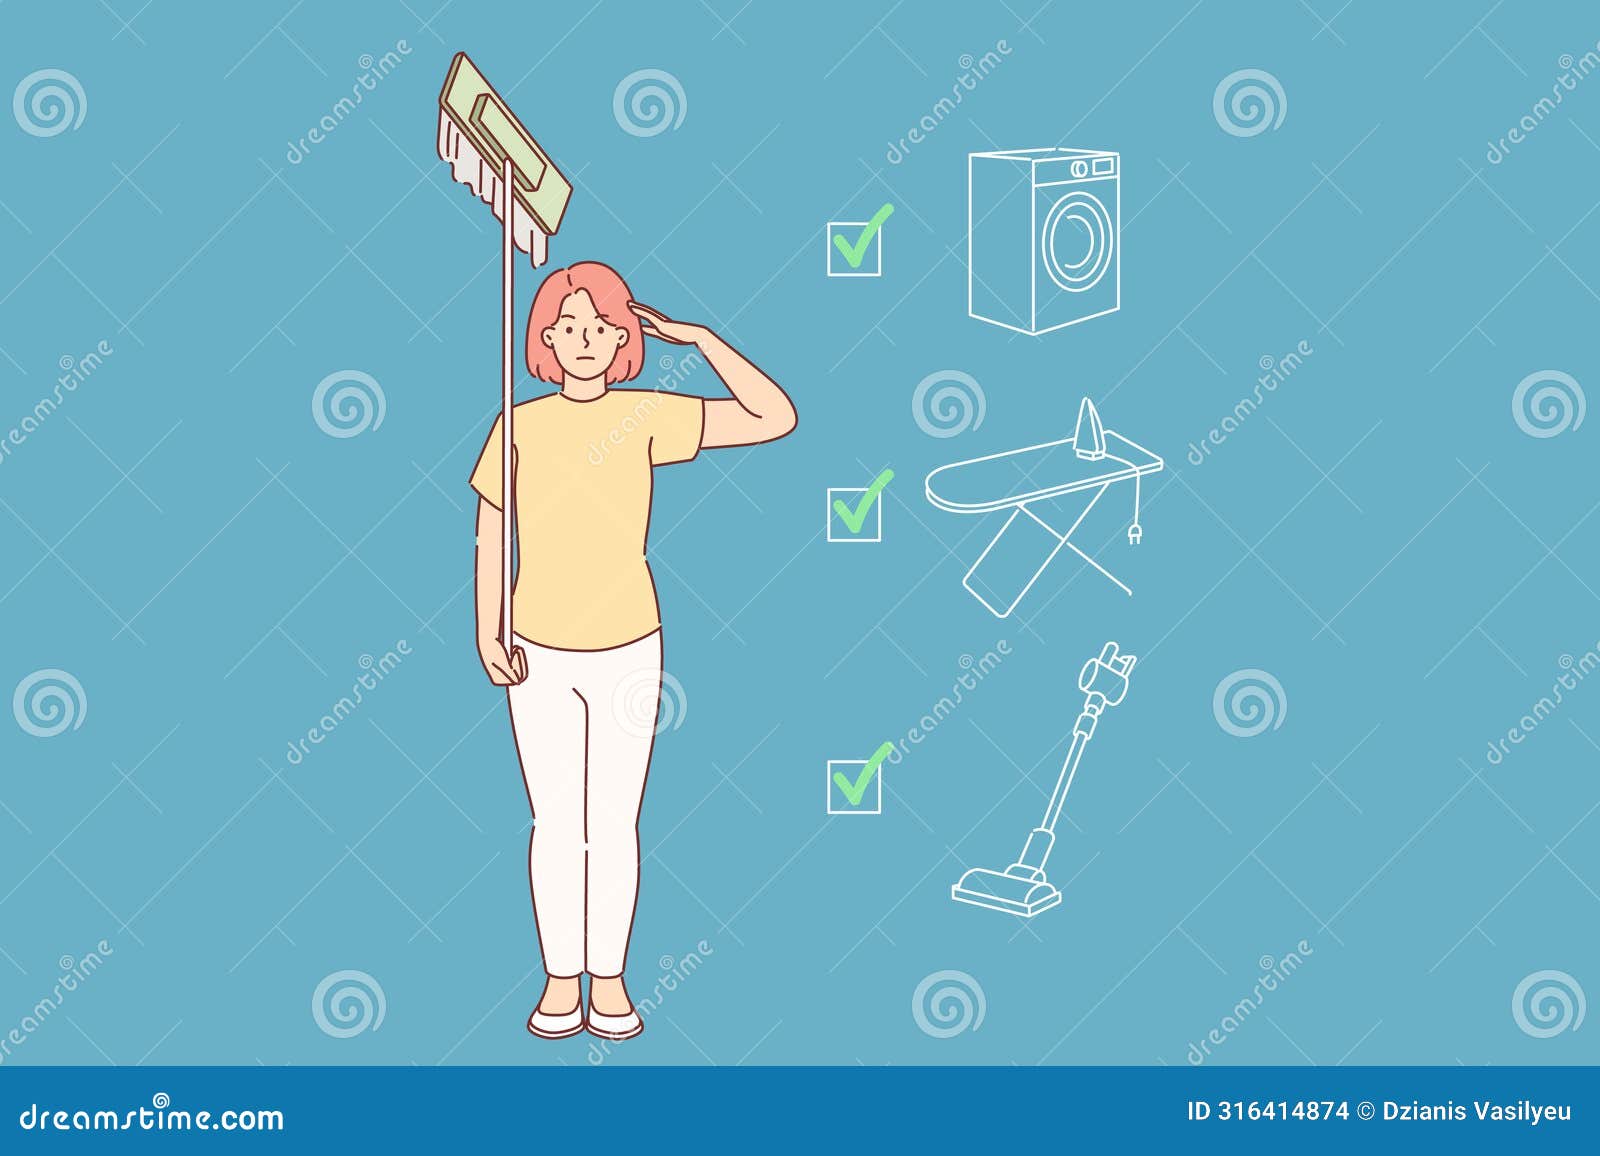 woman housewife completed all housework stands in soldier pose with mop in hands